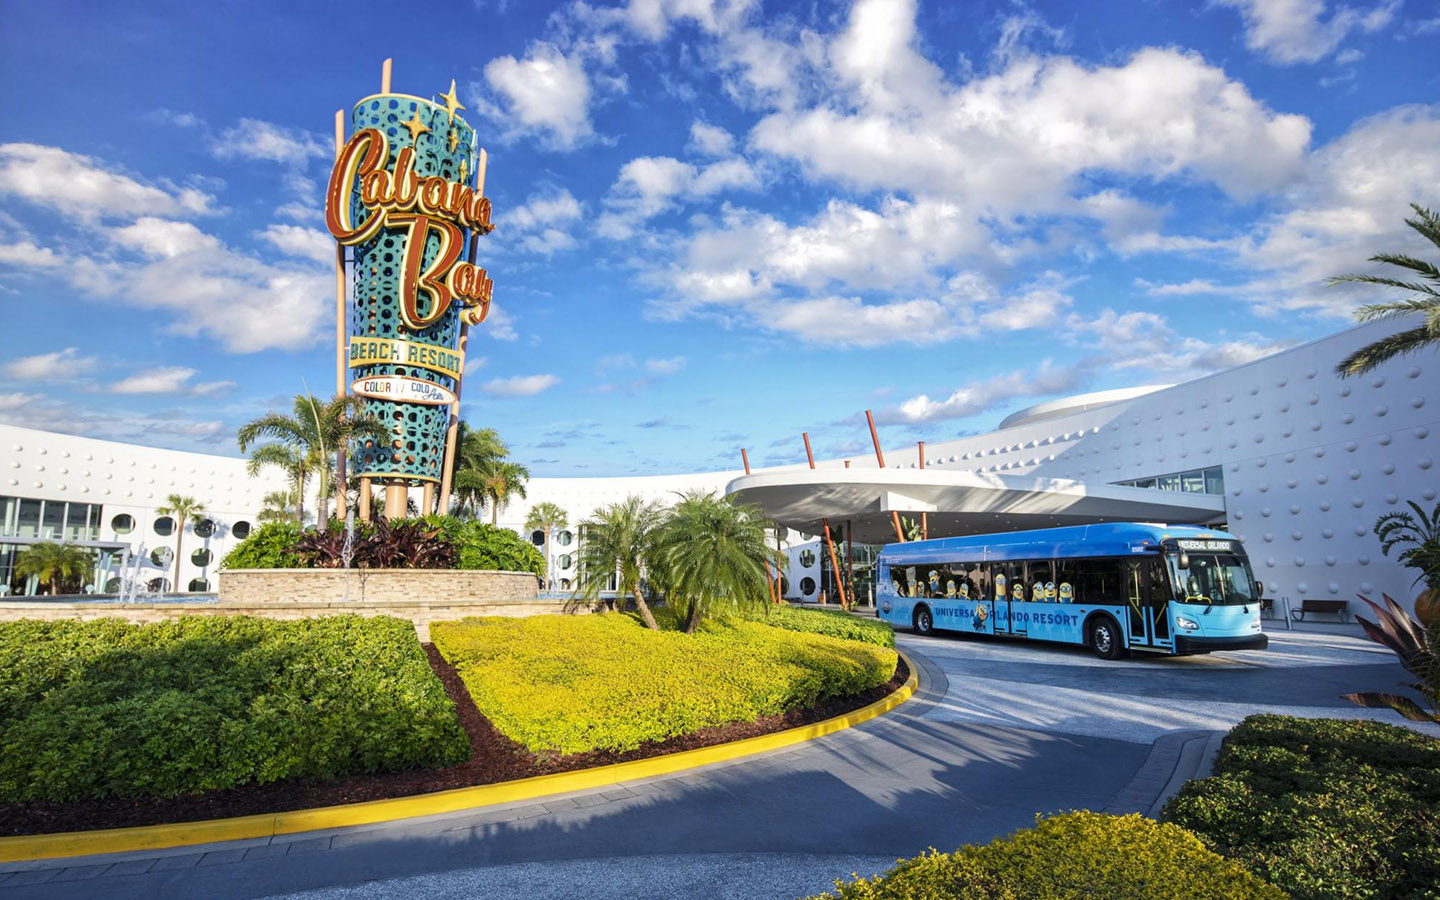 How to Get from Your Hotel to Universal Orlando's Parks